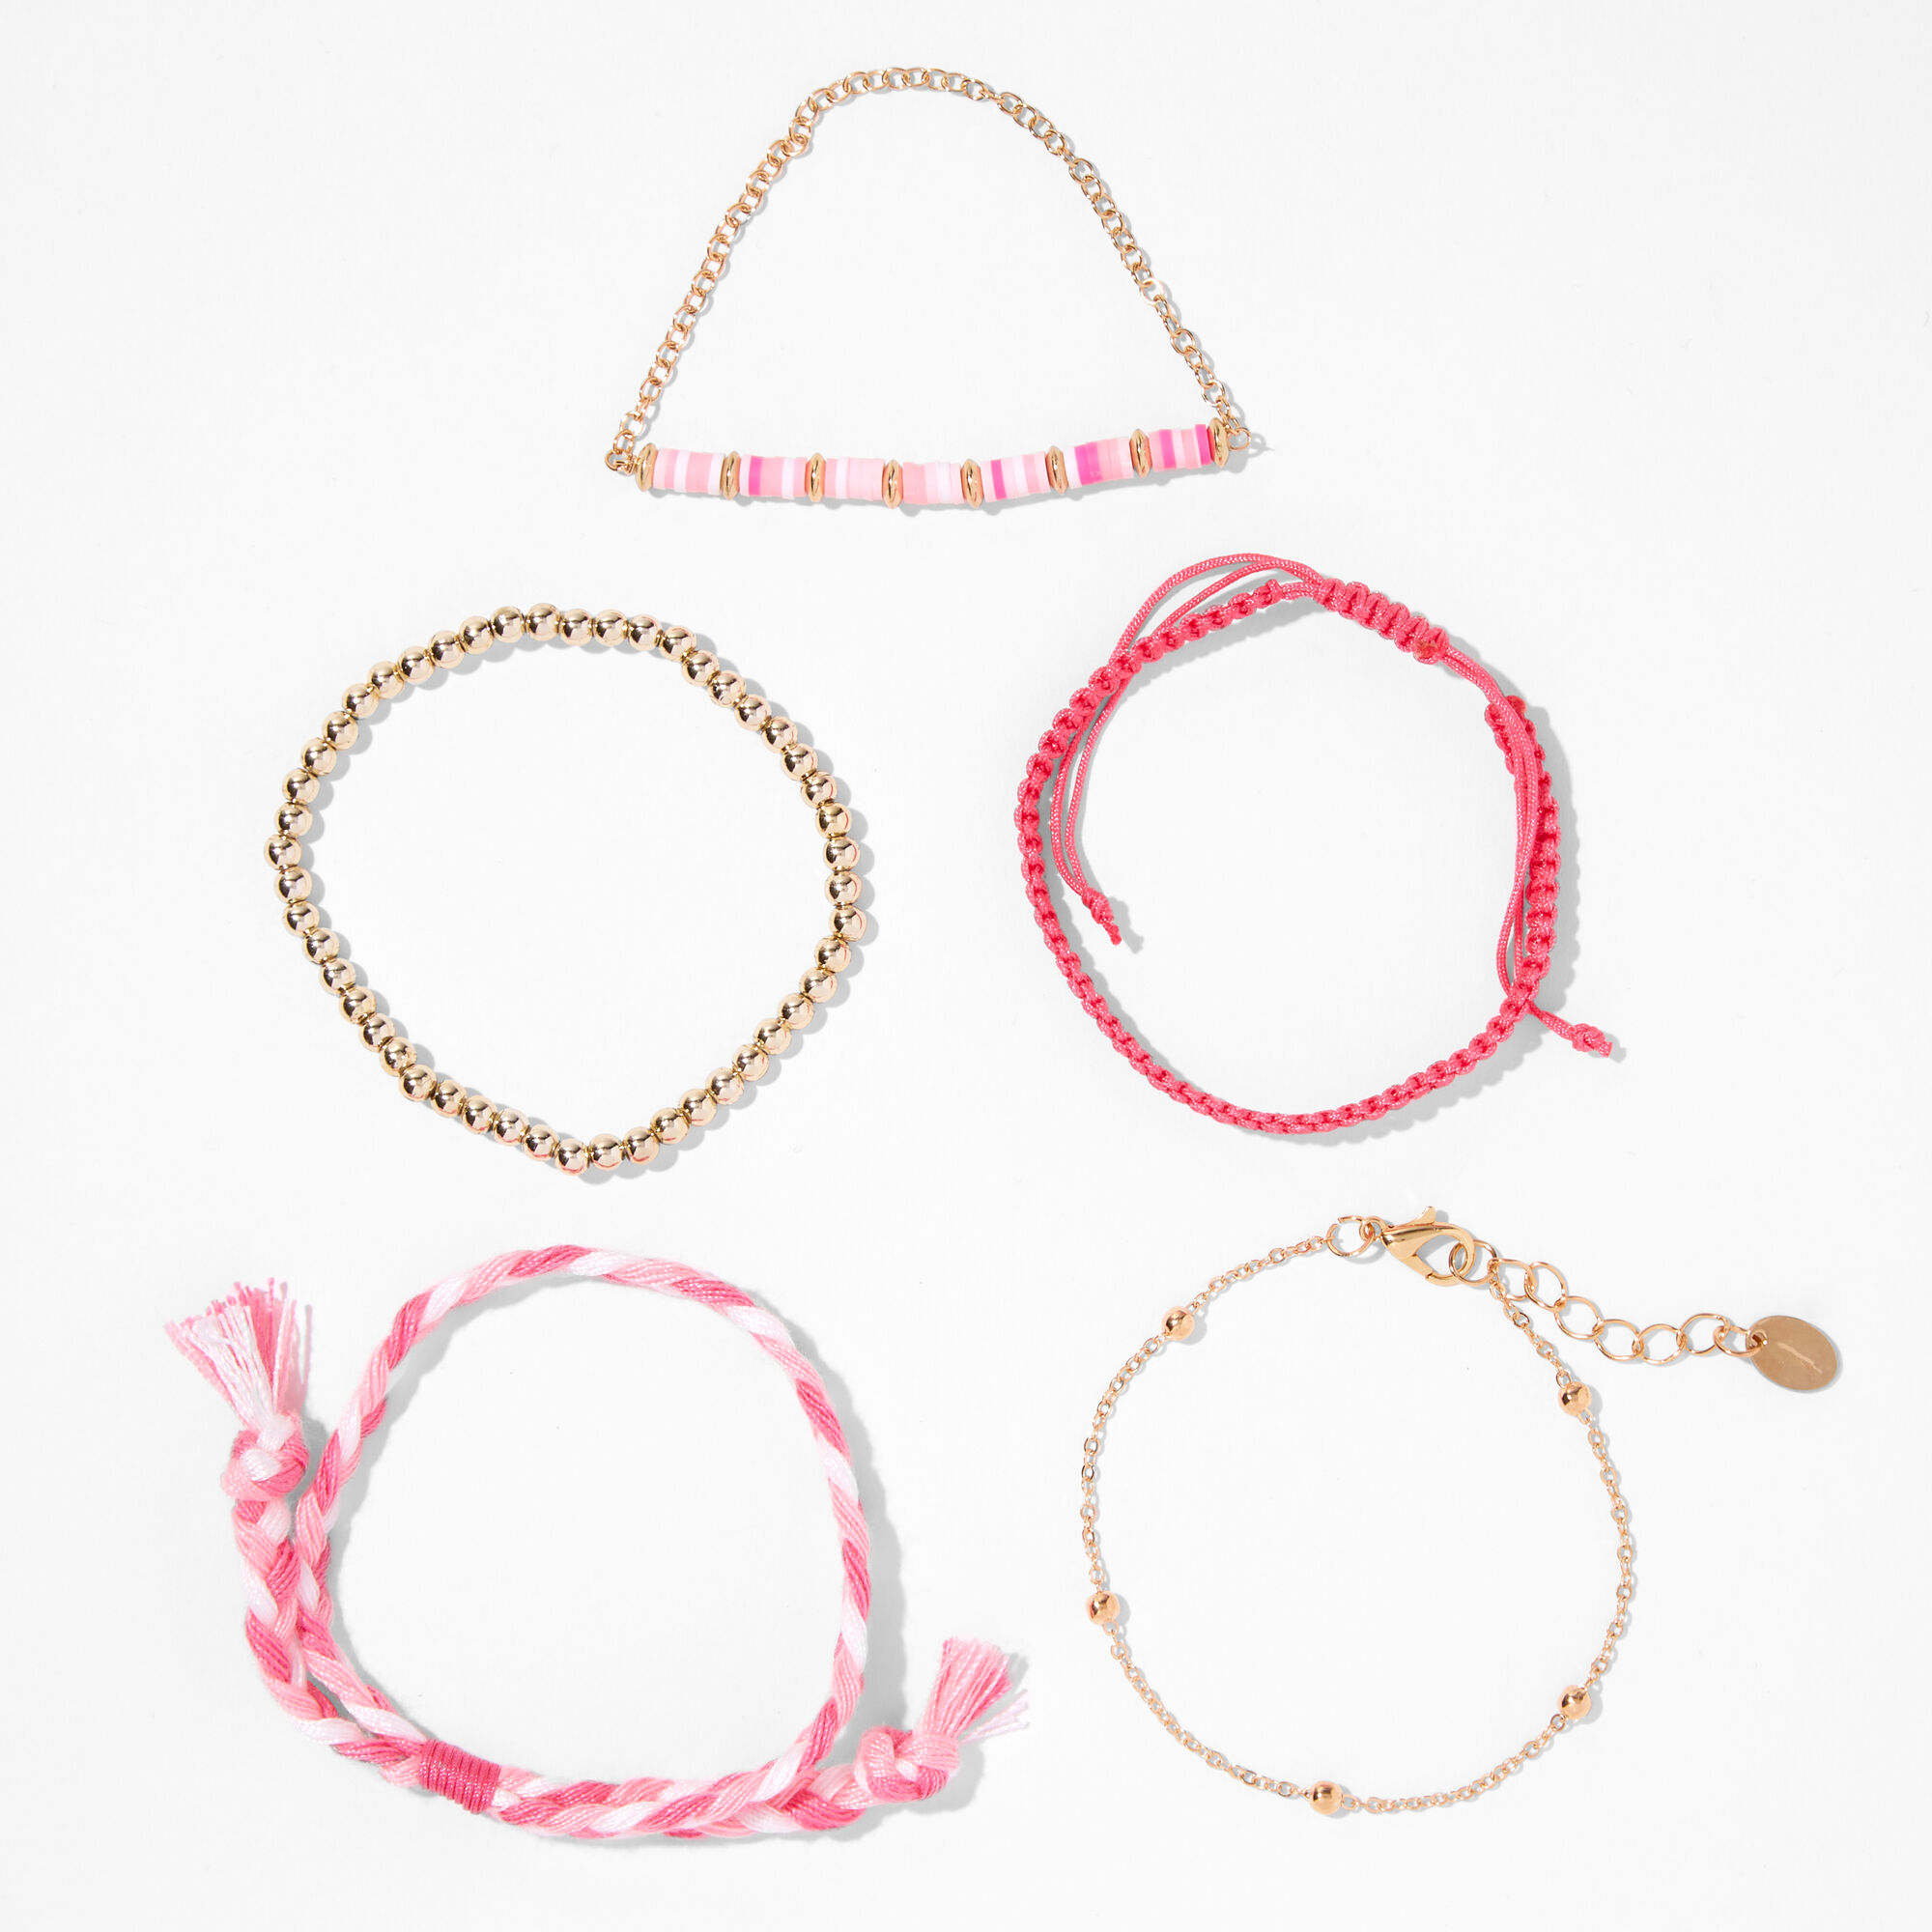 View Claires GoldTone Beaded Woven Bracelet Set 5 Pack Pink information